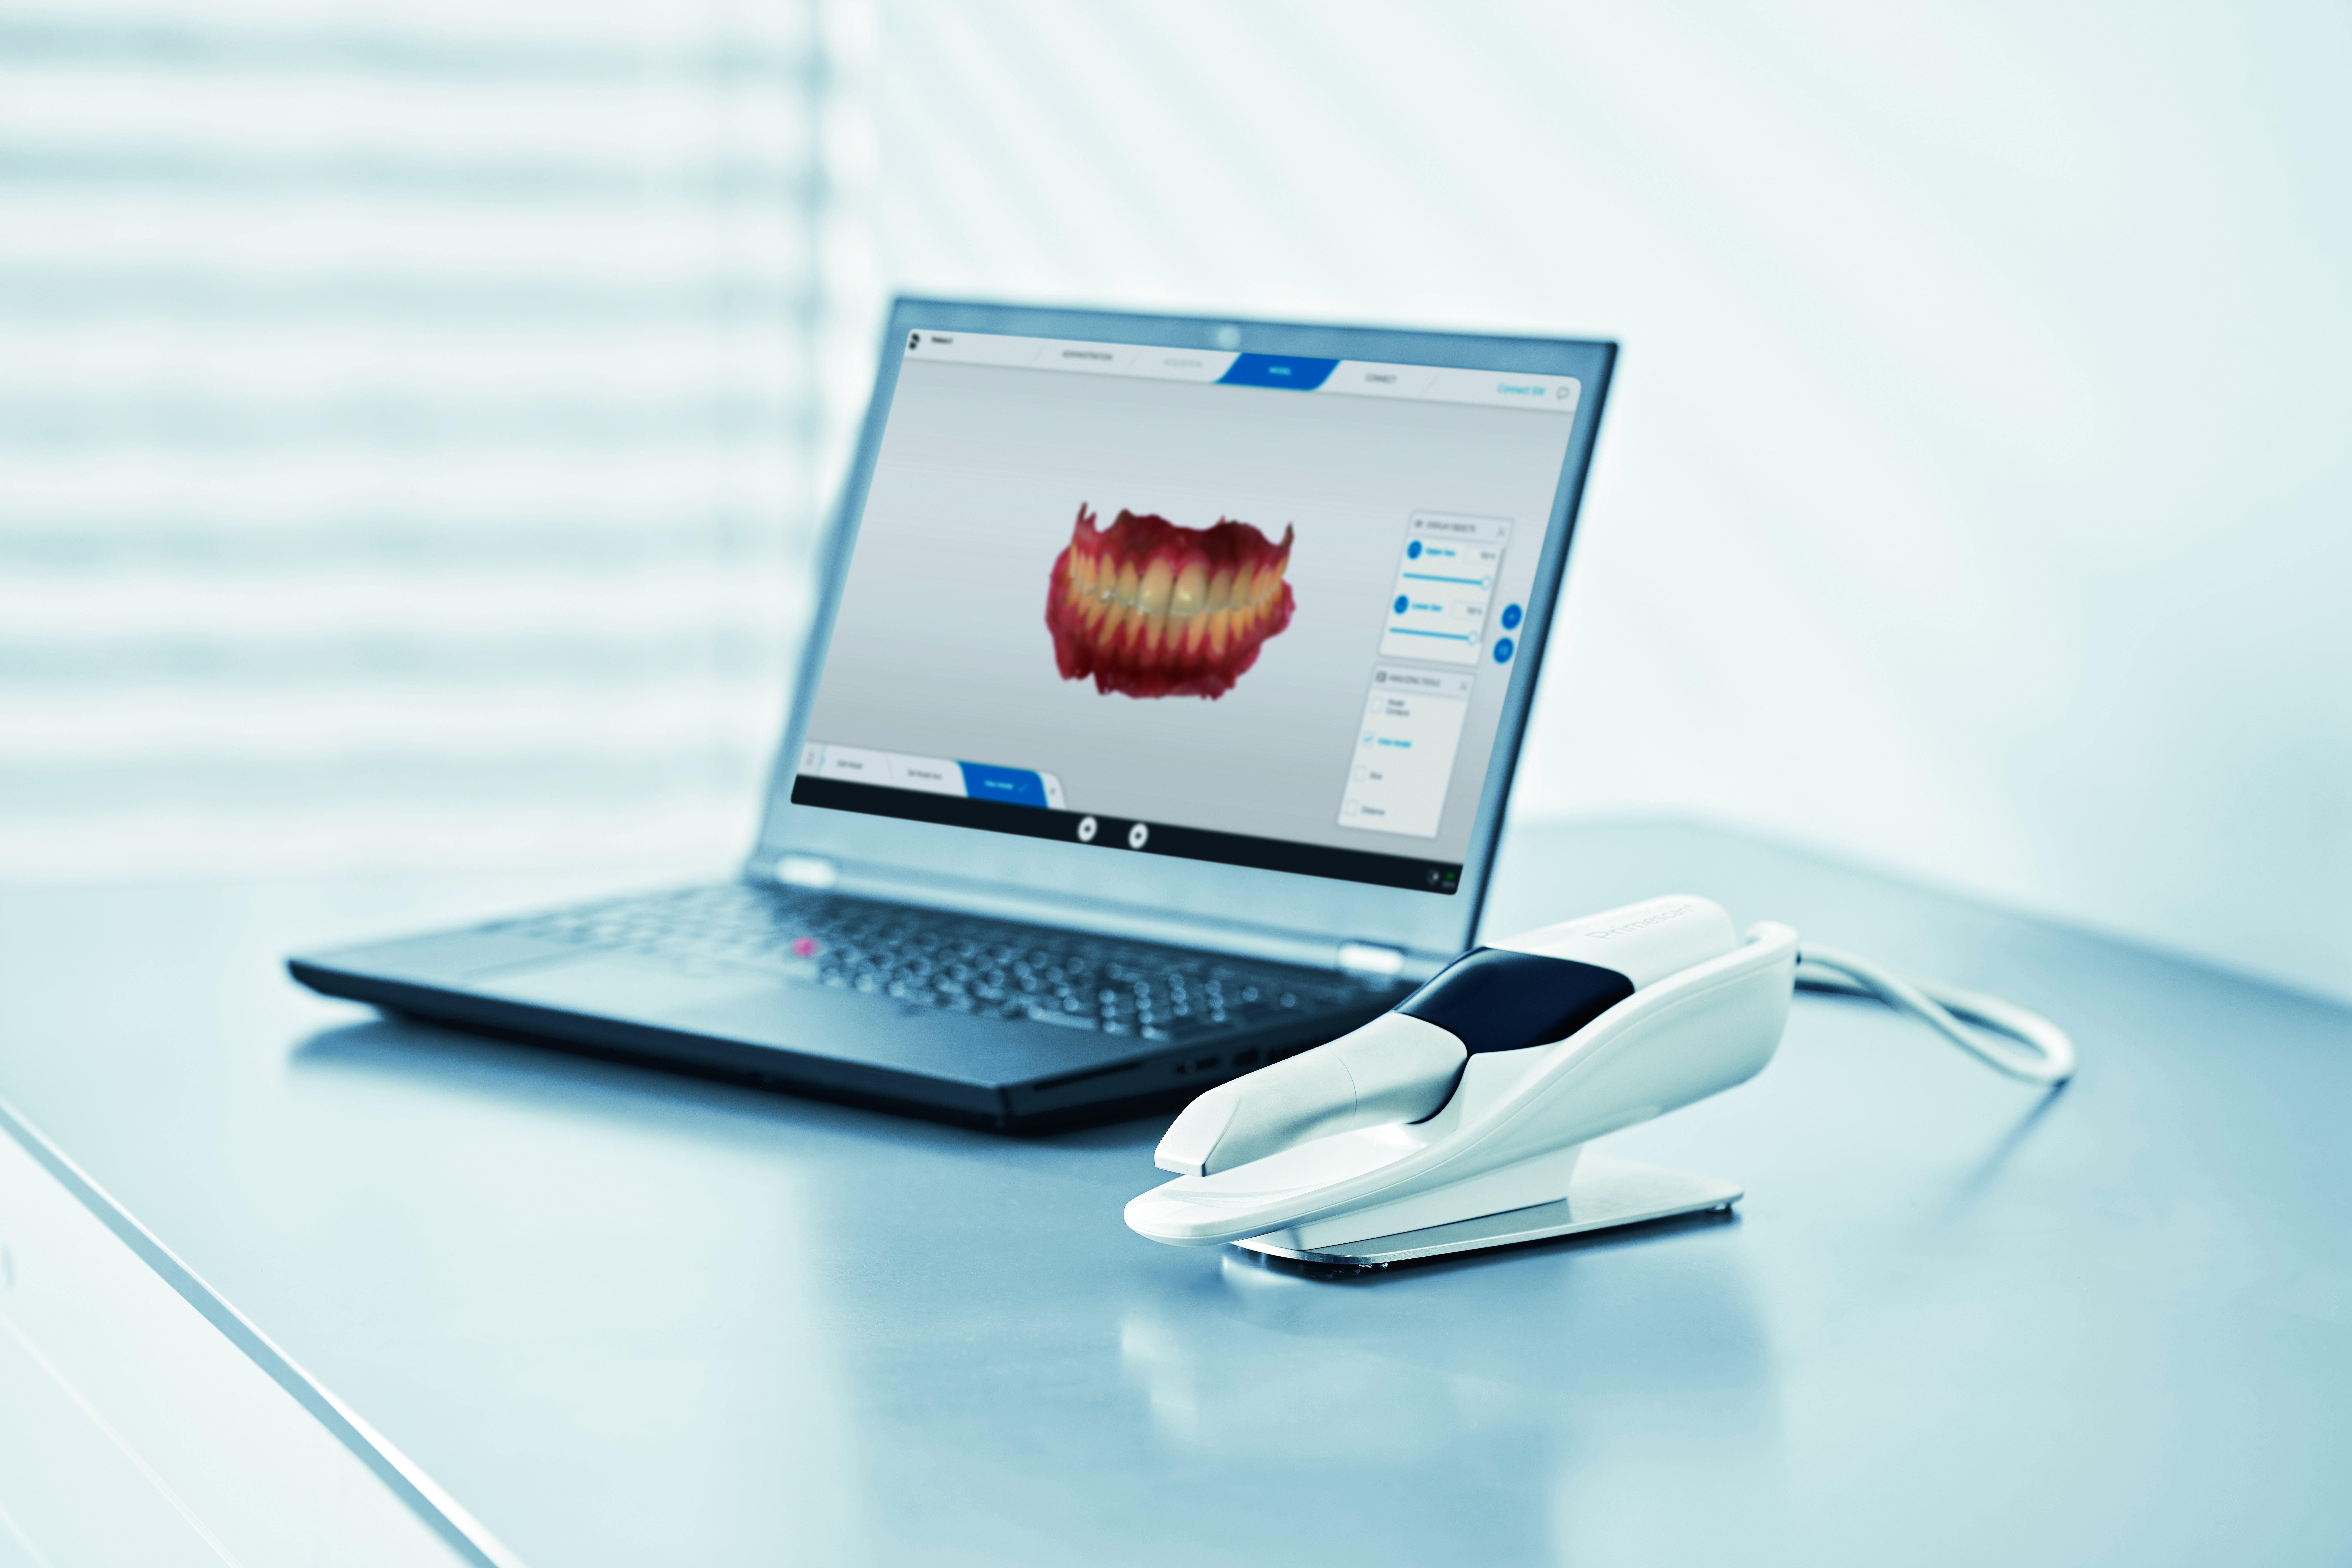 Dentsply Sirona launched new products and solutions as part of its digital dentistry universe designed to bring dentistry to a new level.